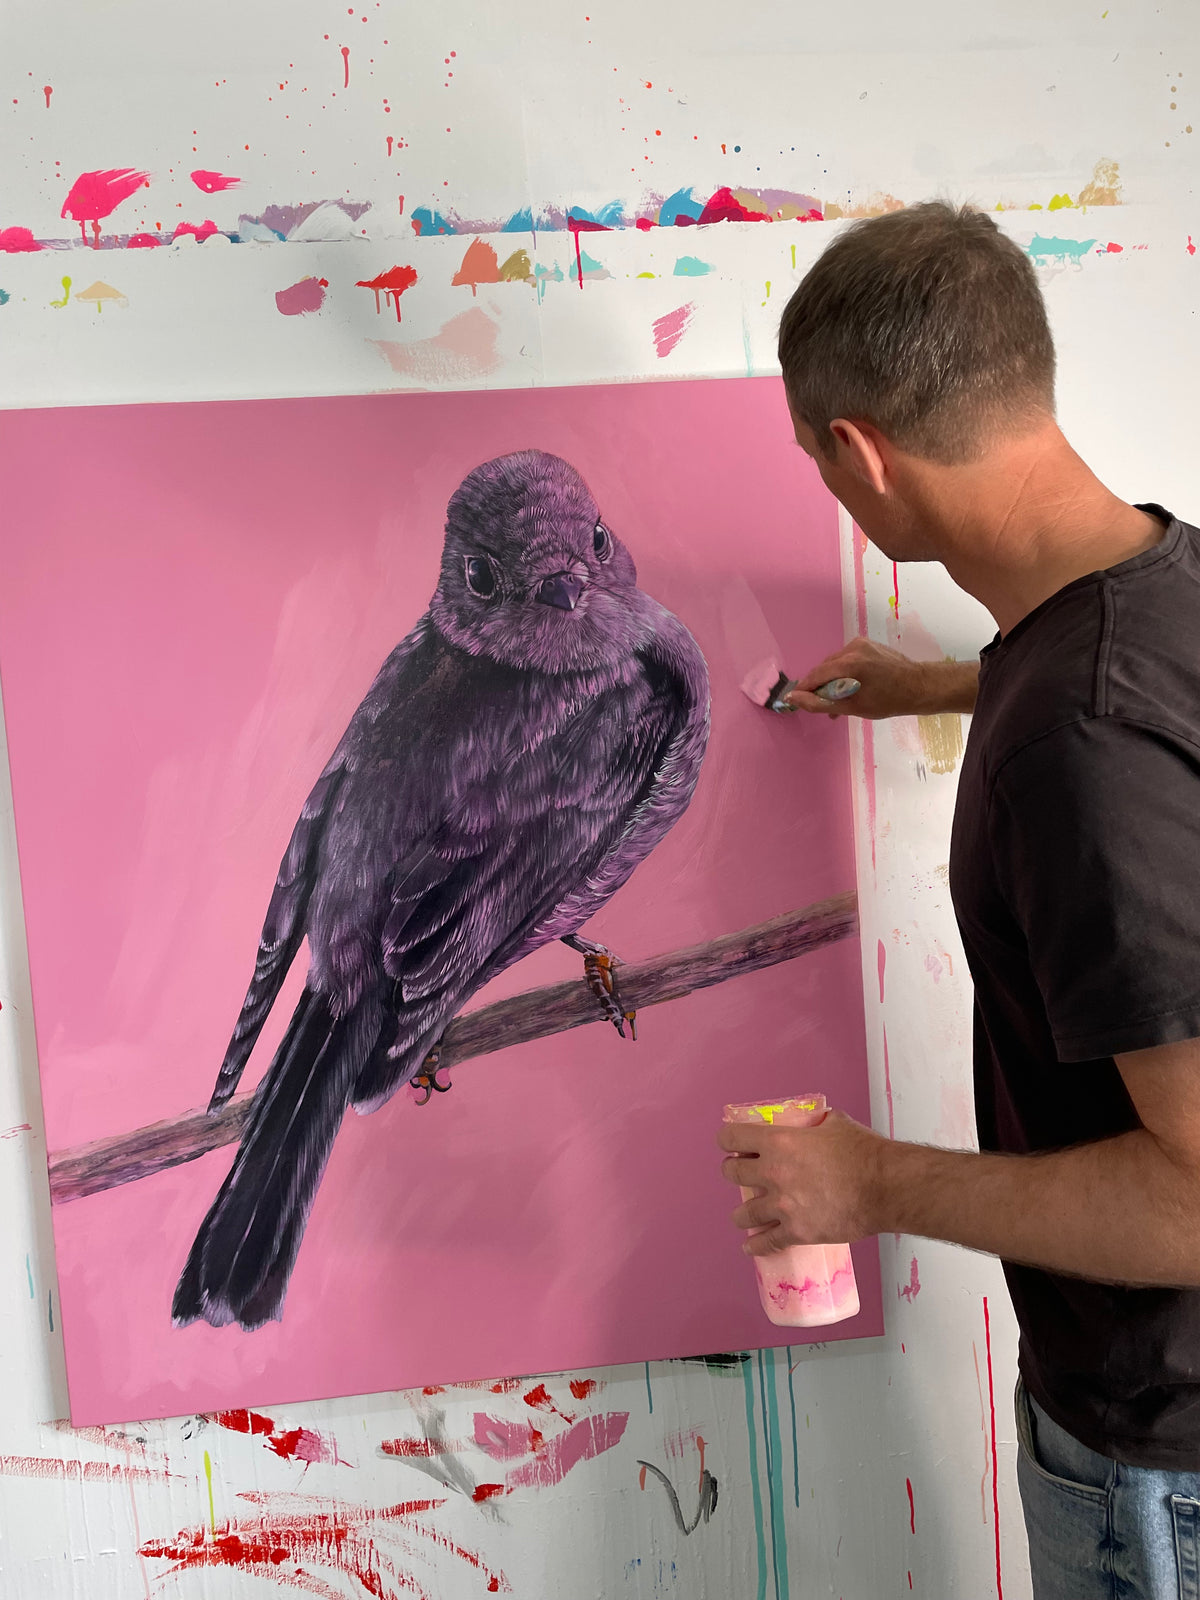 &quot;So often it is the vibrantly colourful Male Rose Robin- Petroica Rosea that is showcased, photographed or painted, this painting is celebration of the beauty and subtle colours of the female. As a colourist I love working with pinks, there is so much nuance to them&quot;Geoffrey Carran. Phot of the artist painting in the studio